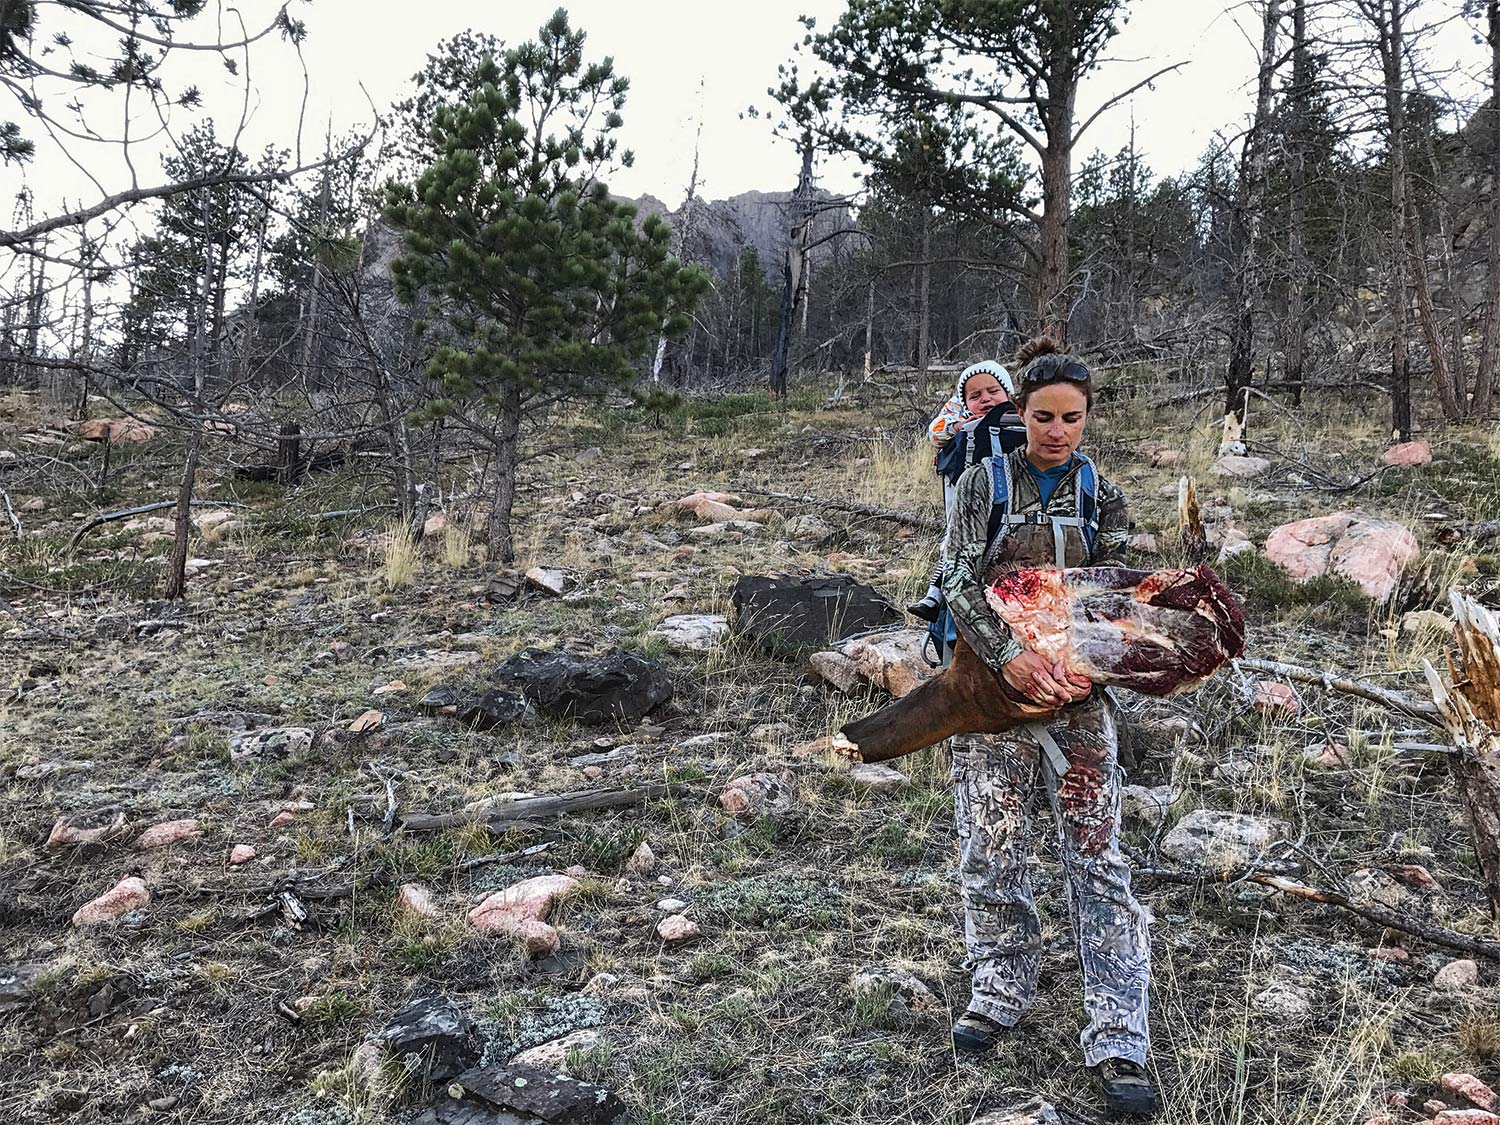 The author helps pack out her husband's elk while carrying her daughter on her back.